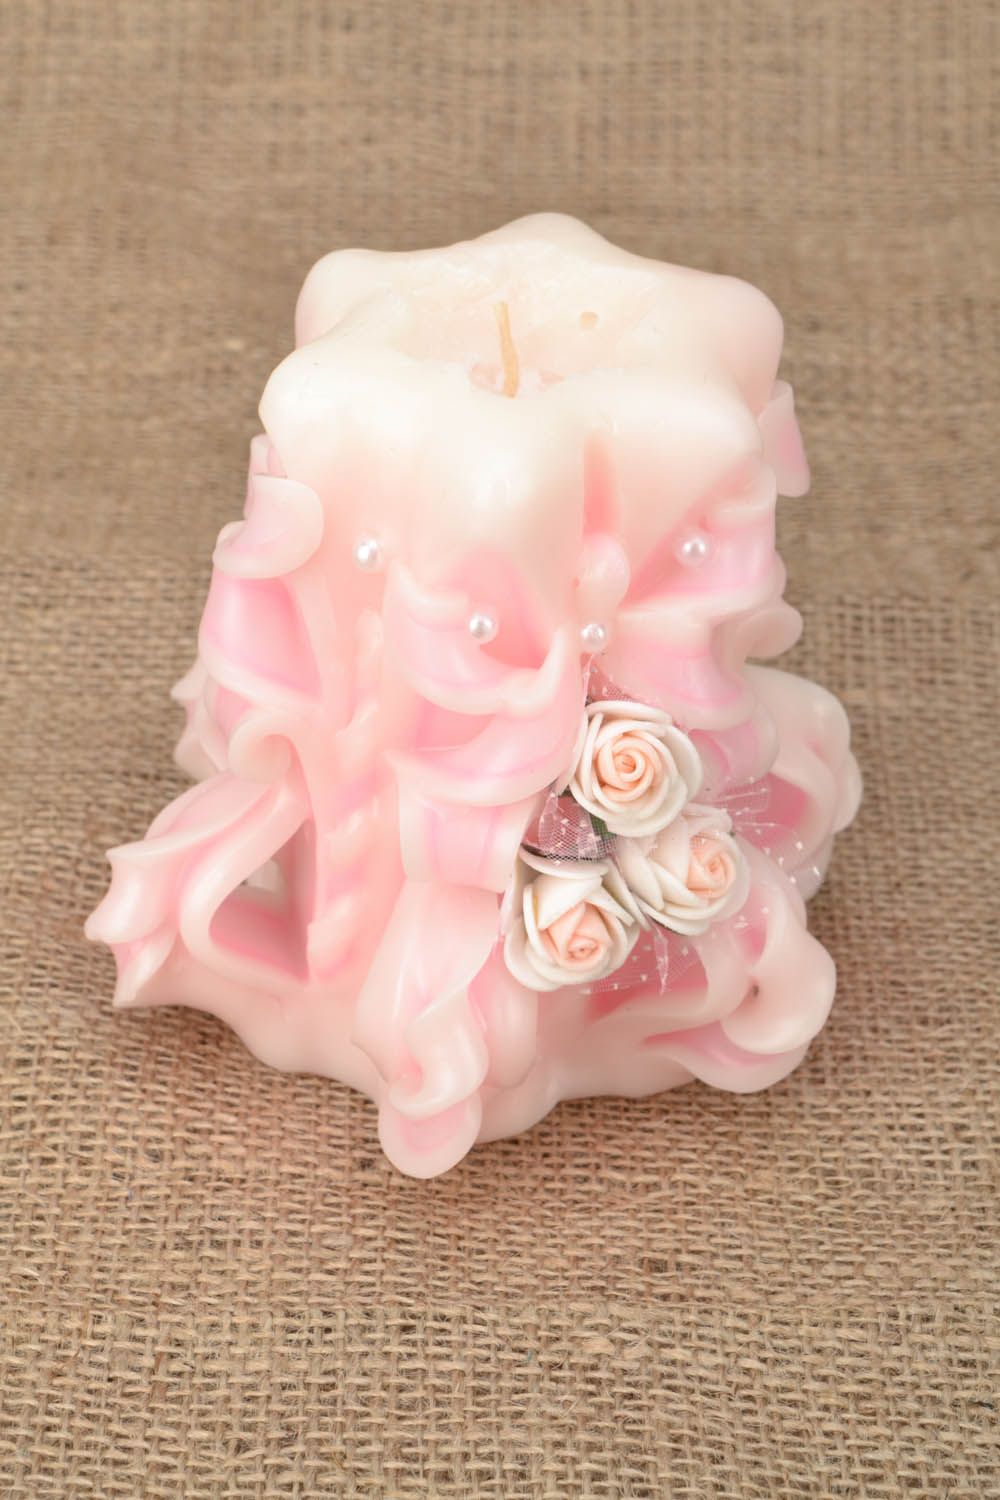 Designer handmade candle with roses photo 1